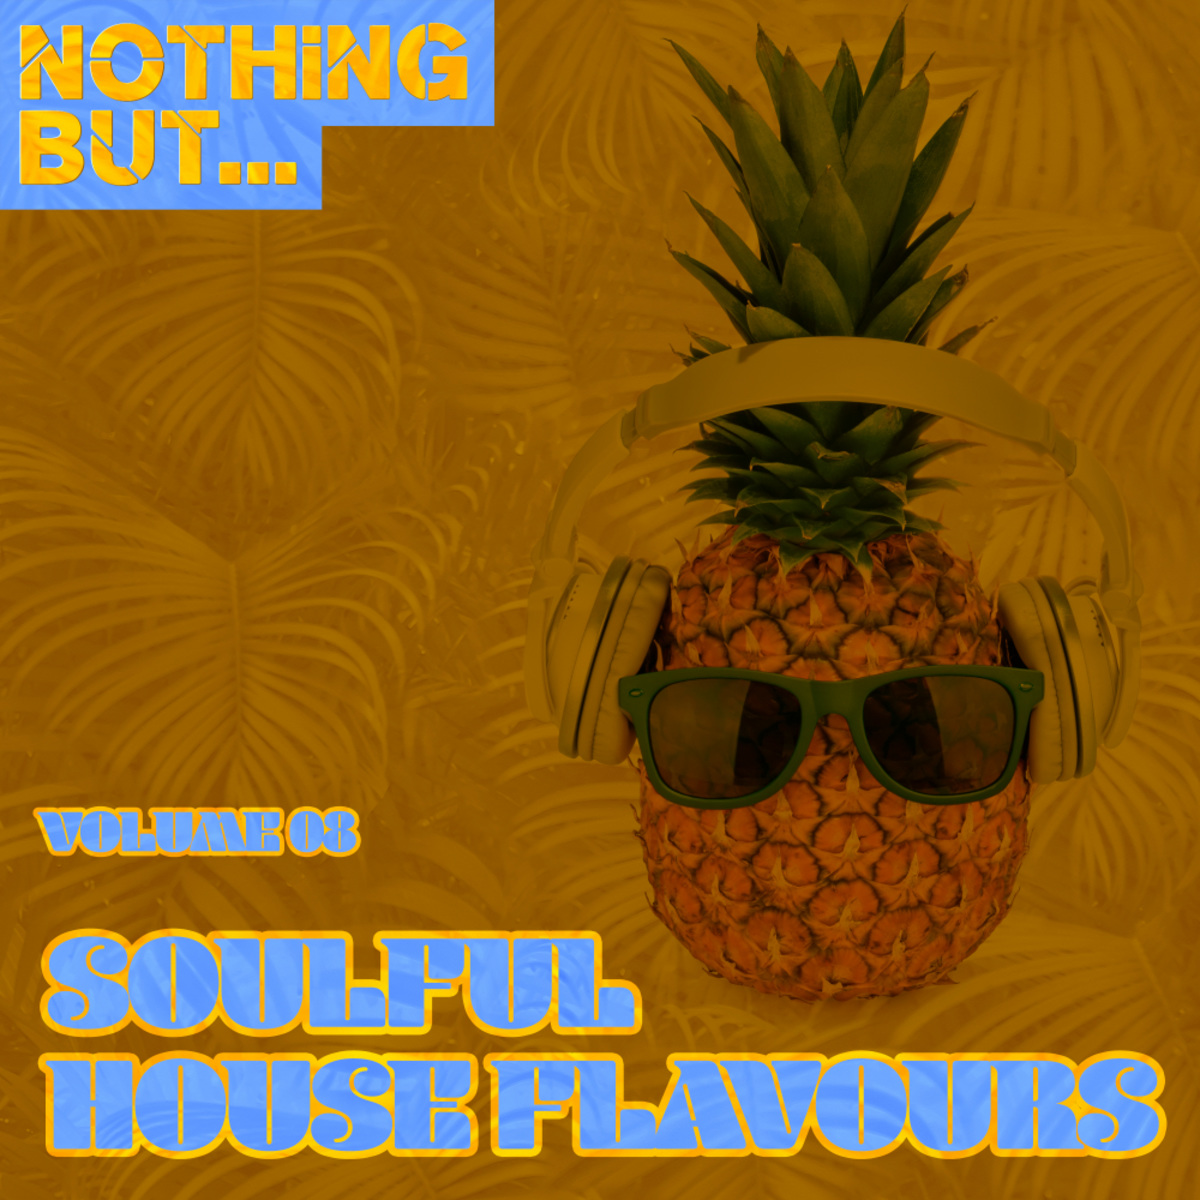 VA - Nothing But... Soulful House Flavours, Vol. 08 / Nothing But